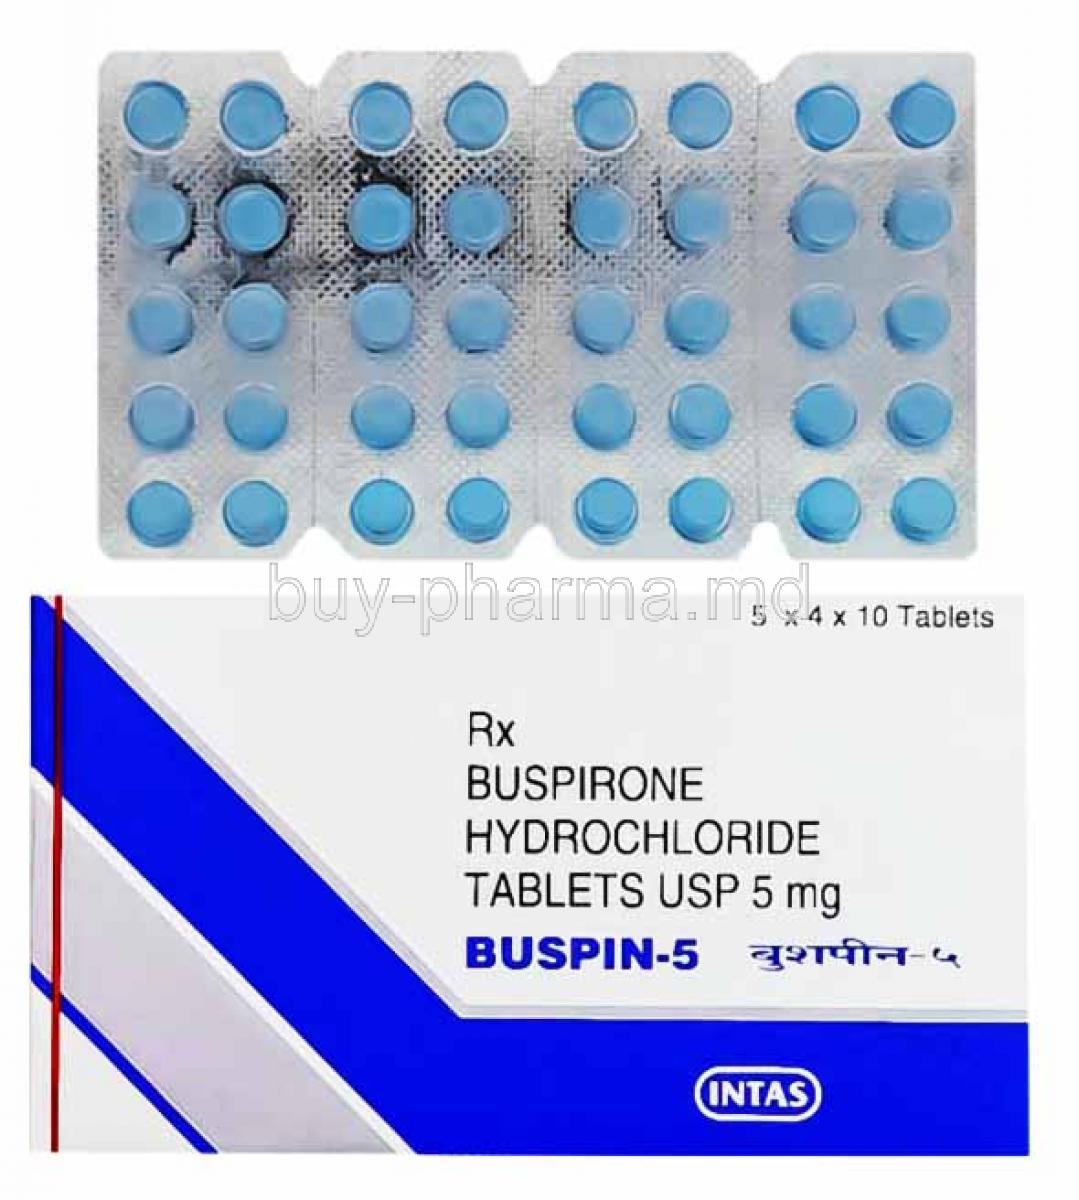 Buspin, Buspirone 5mg box and tablets